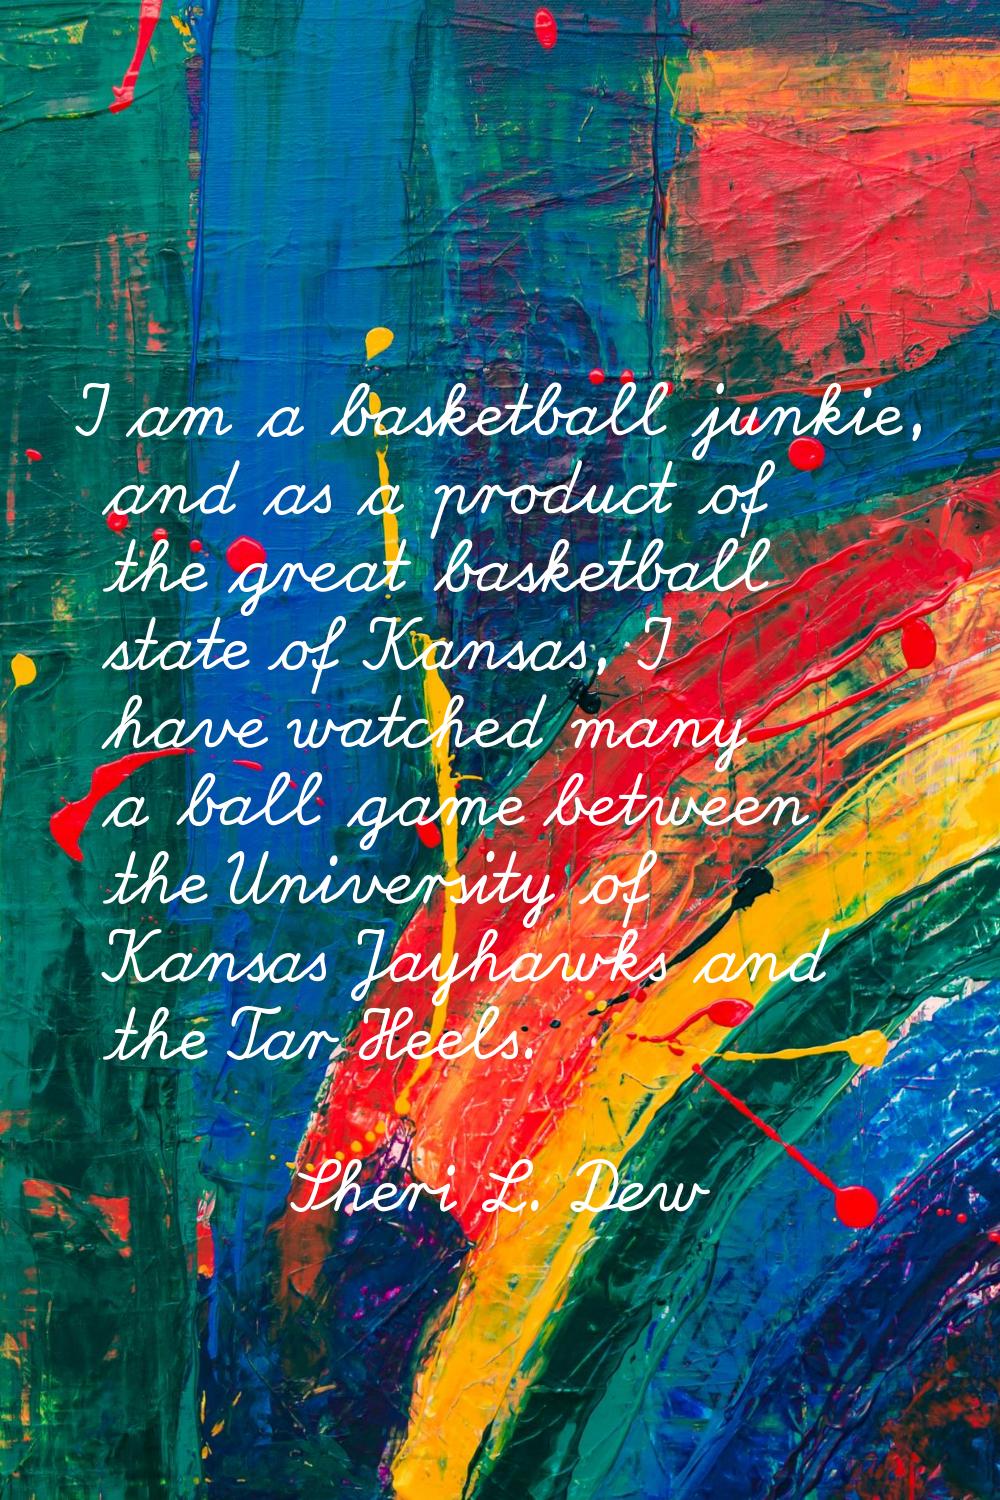 I am a basketball junkie, and as a product of the great basketball state of Kansas, I have watched 